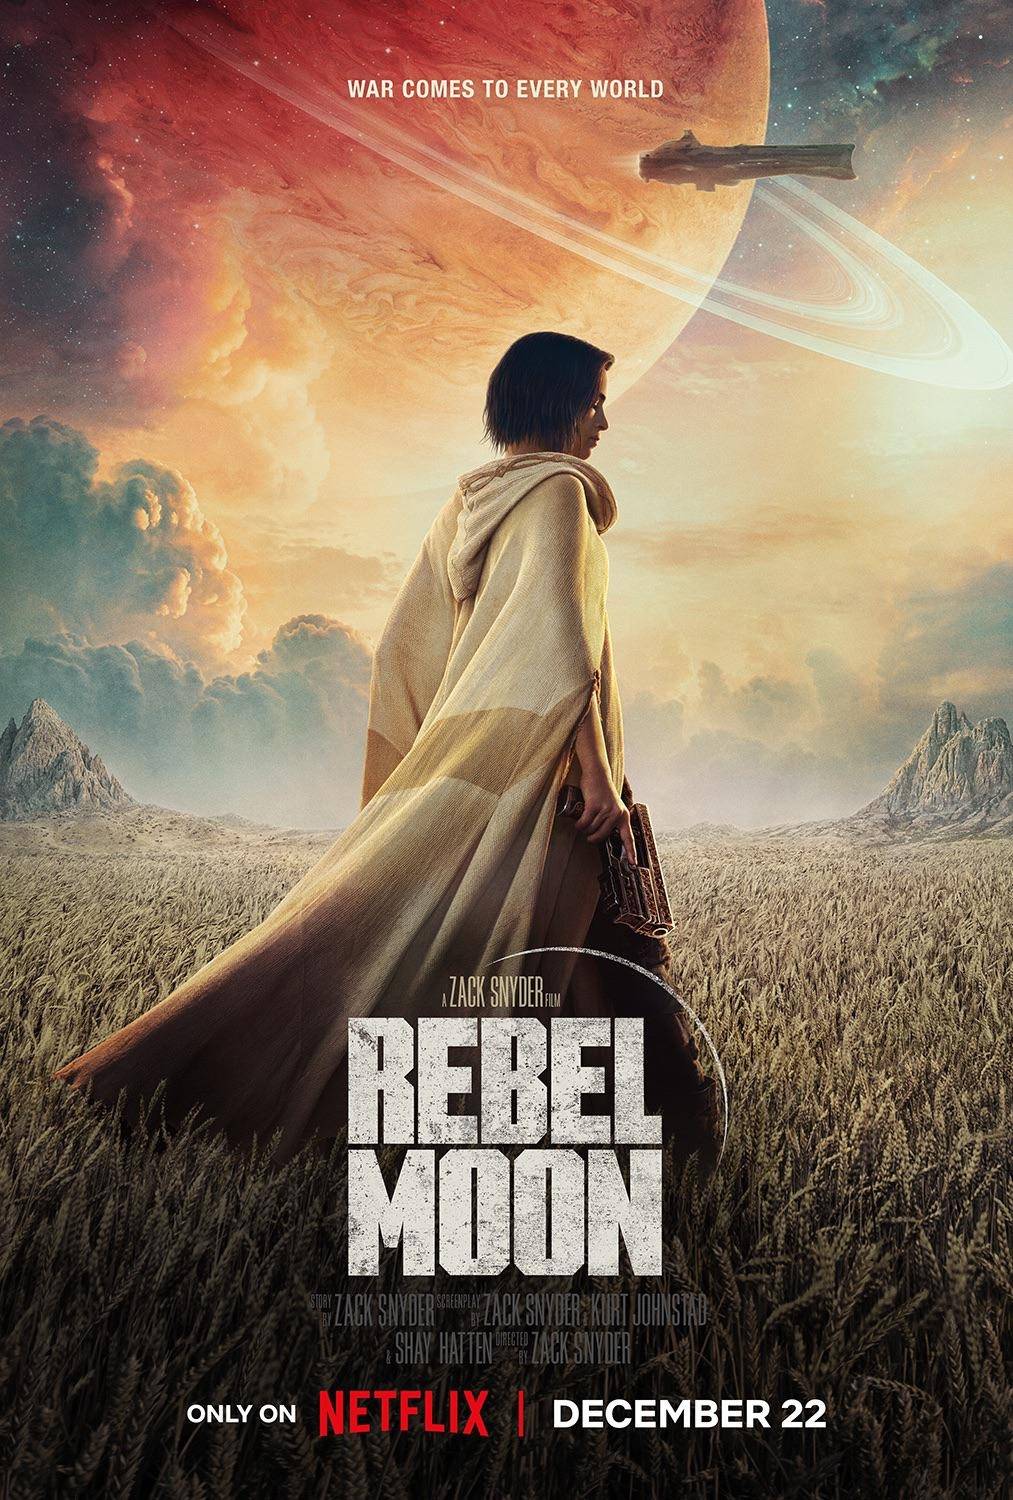 Trailer Drops for Zack Snyder's 'Rebel Moon - Part One: A Child of Fire